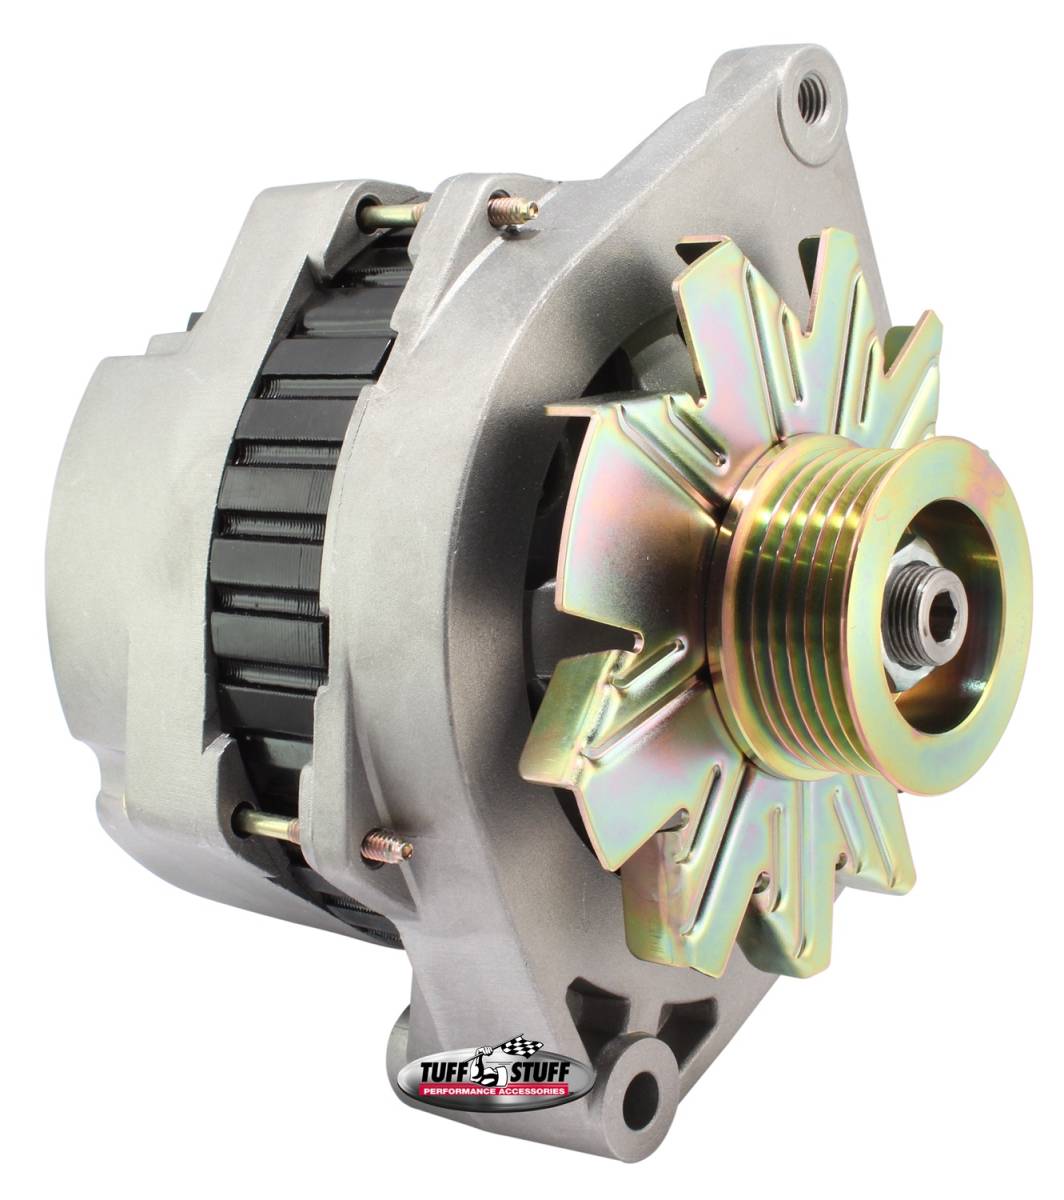 Tuff Stuff Performance - Alternator 250 High AMP Incl. Pigtail/OEM Wiring 6 Groove Pulley Factory Cast PLUS+ 7290ND6G